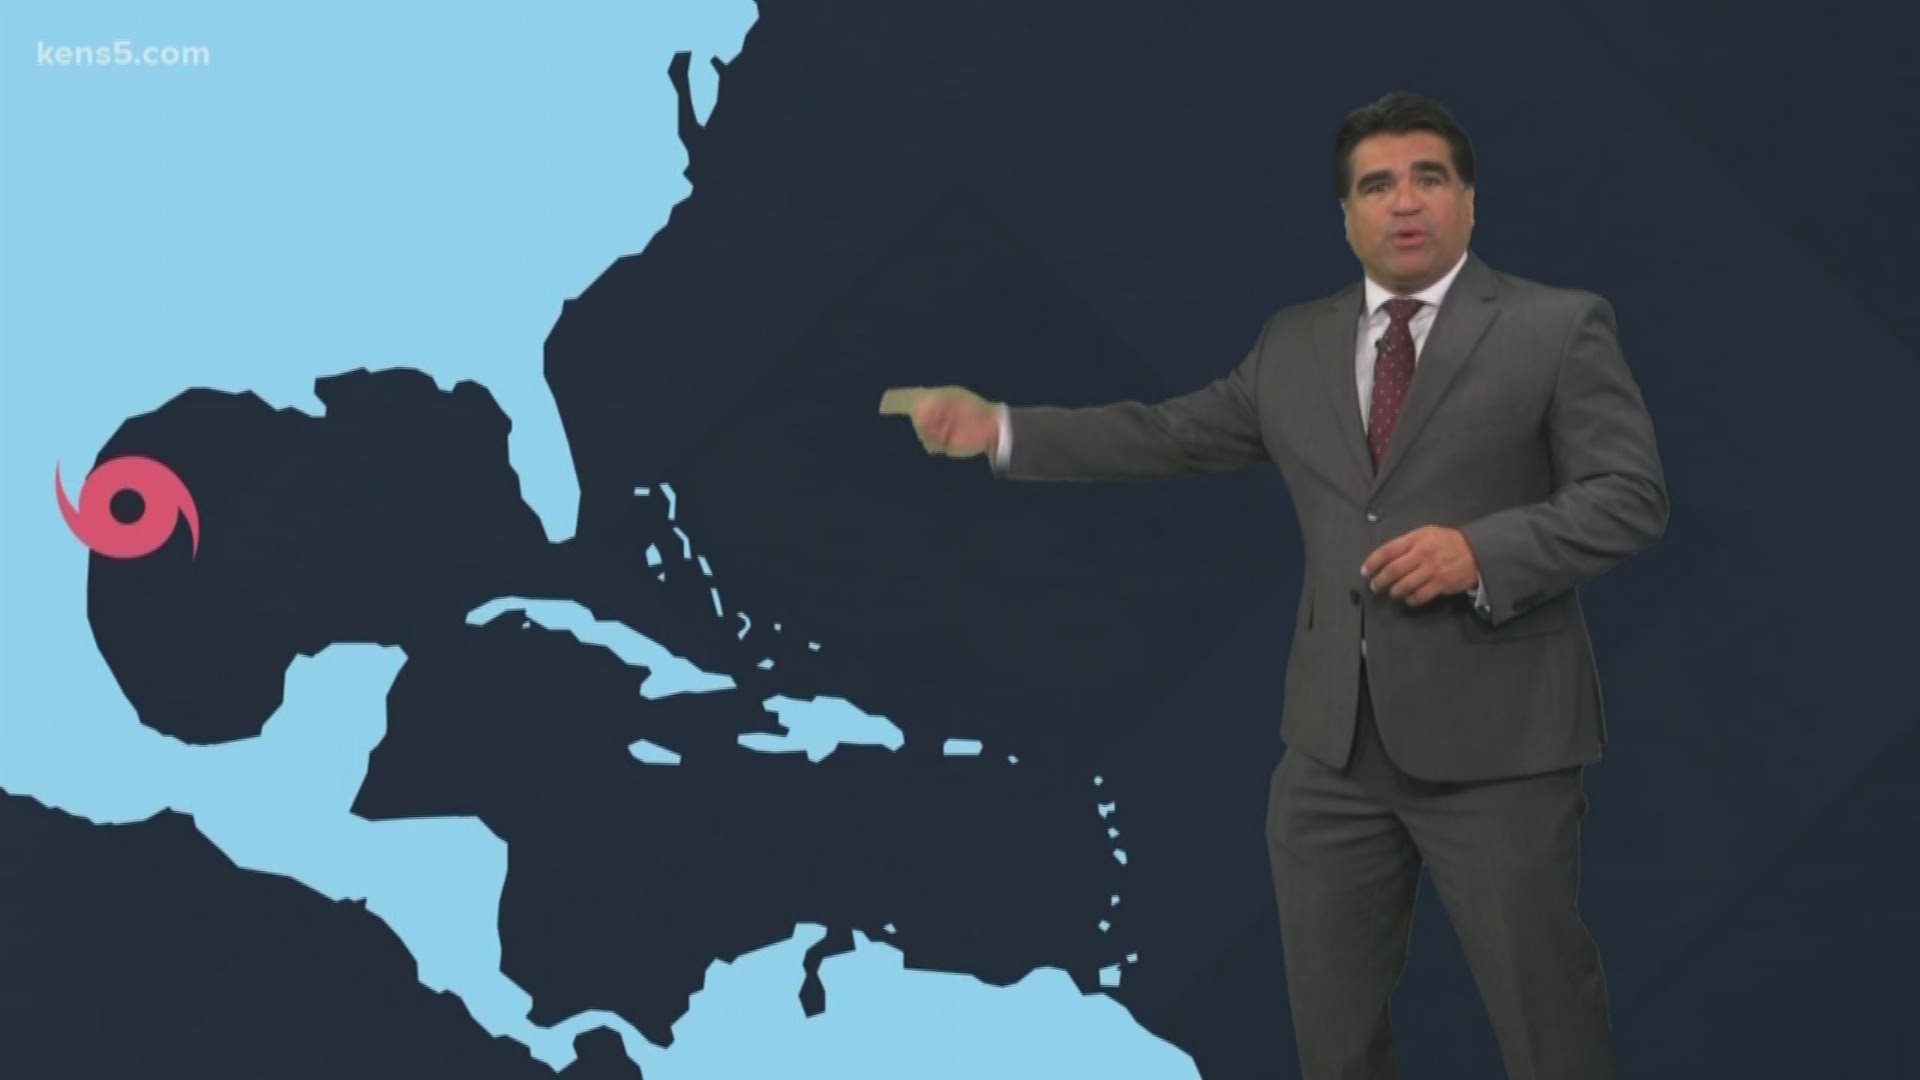 Meteorologist Paul Mireles expands our weather minds on tropical system movement.